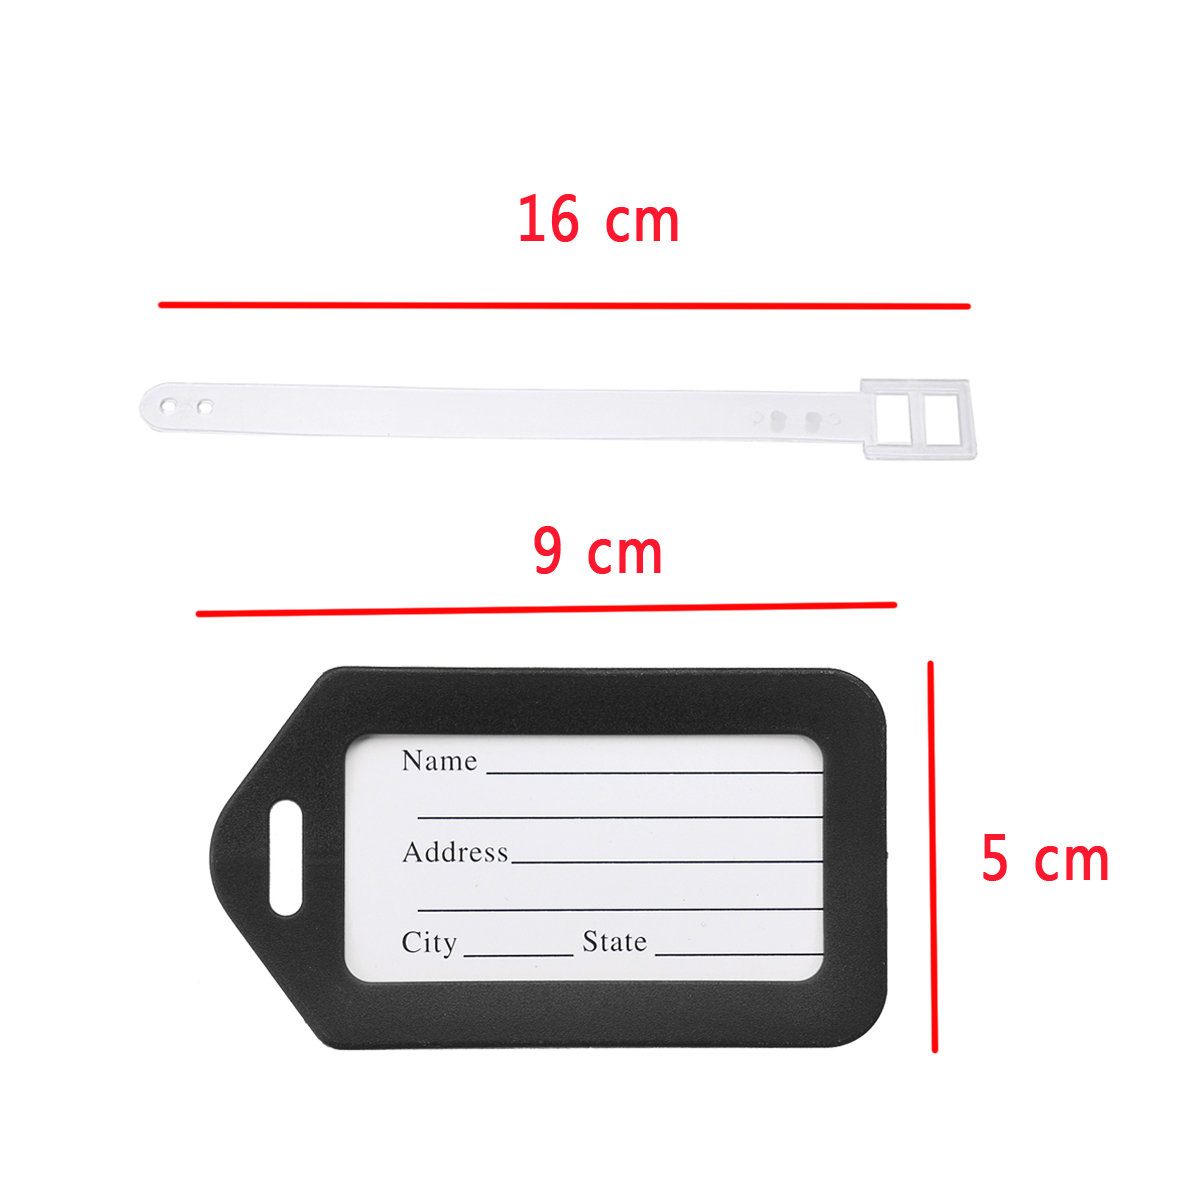 10-Pcs-Luggage-Bag-Tag-Name-Address-ID-Label-Plastic-Travel-Bag-Tags-for-Suitcase-Bag-1714336-2